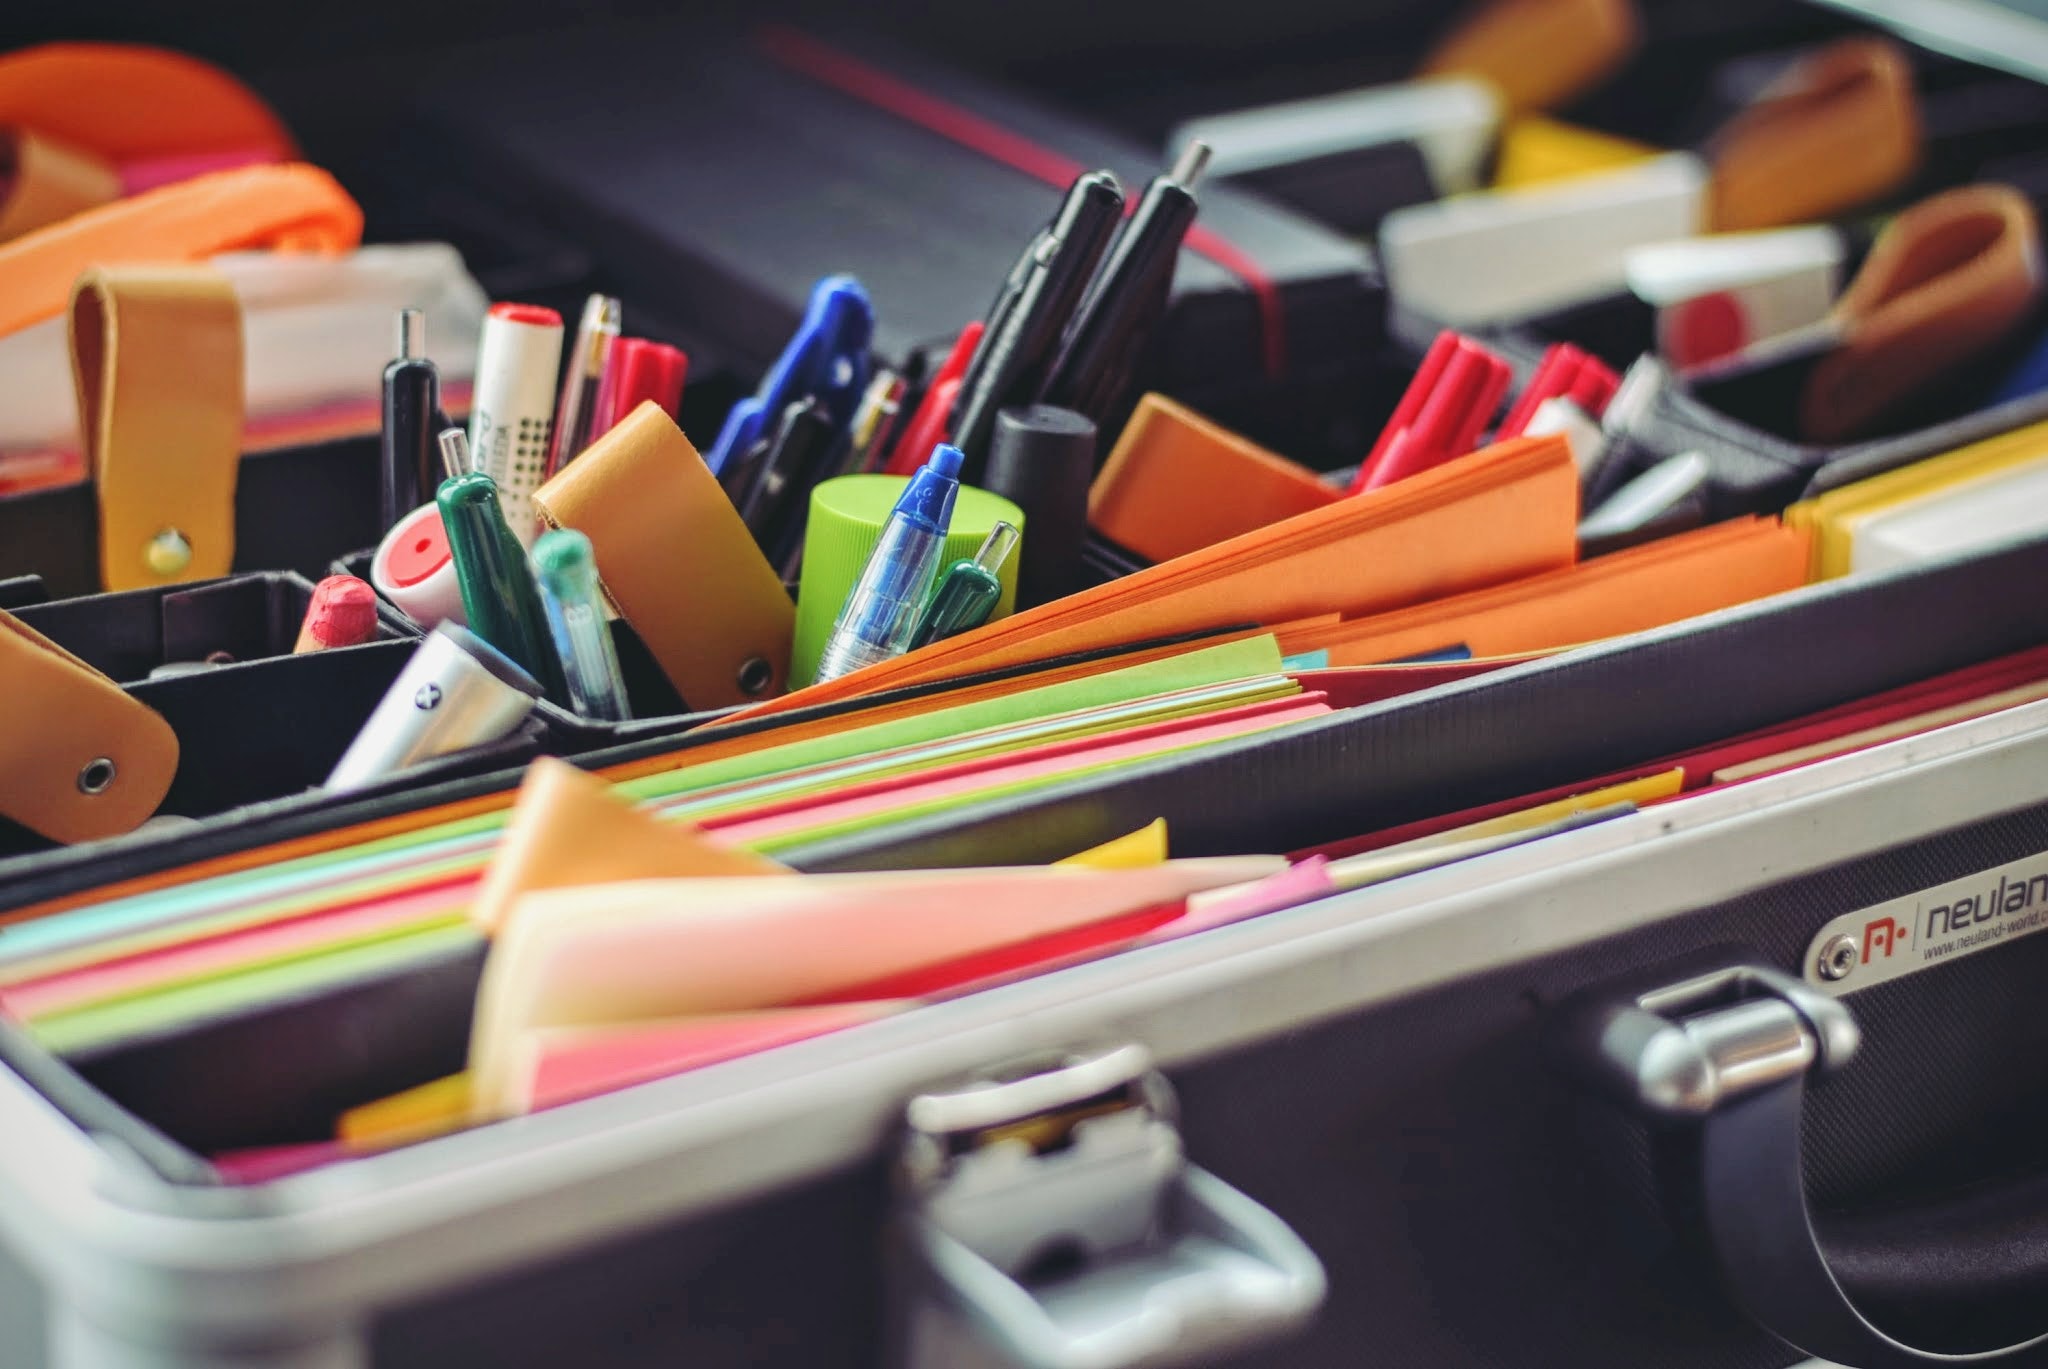 Even in a paperless environment, offices supplies are frequently used